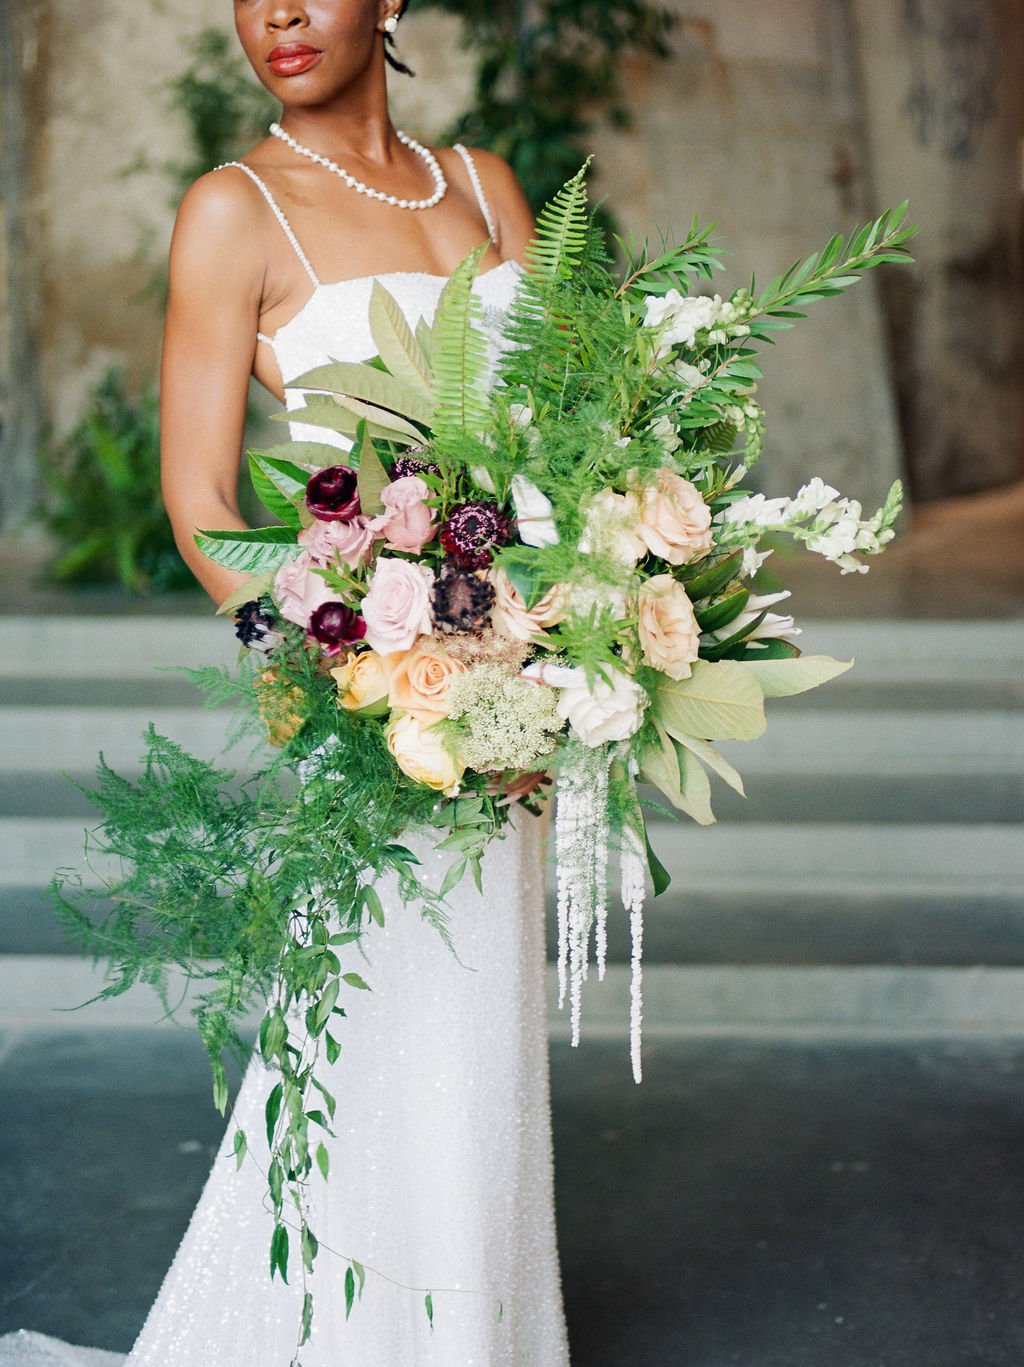 5-things-to-know-before-booking-your-wedding-florist-brought-to-you-by-savannah-wedding-planner-and-savannah-florist-ivory-and-beau-savannah-plant-riverside-district-savannah-wedding-savannah-bridal-shop-maggie-sottero-made-wiith-love-bridal-36.jpg